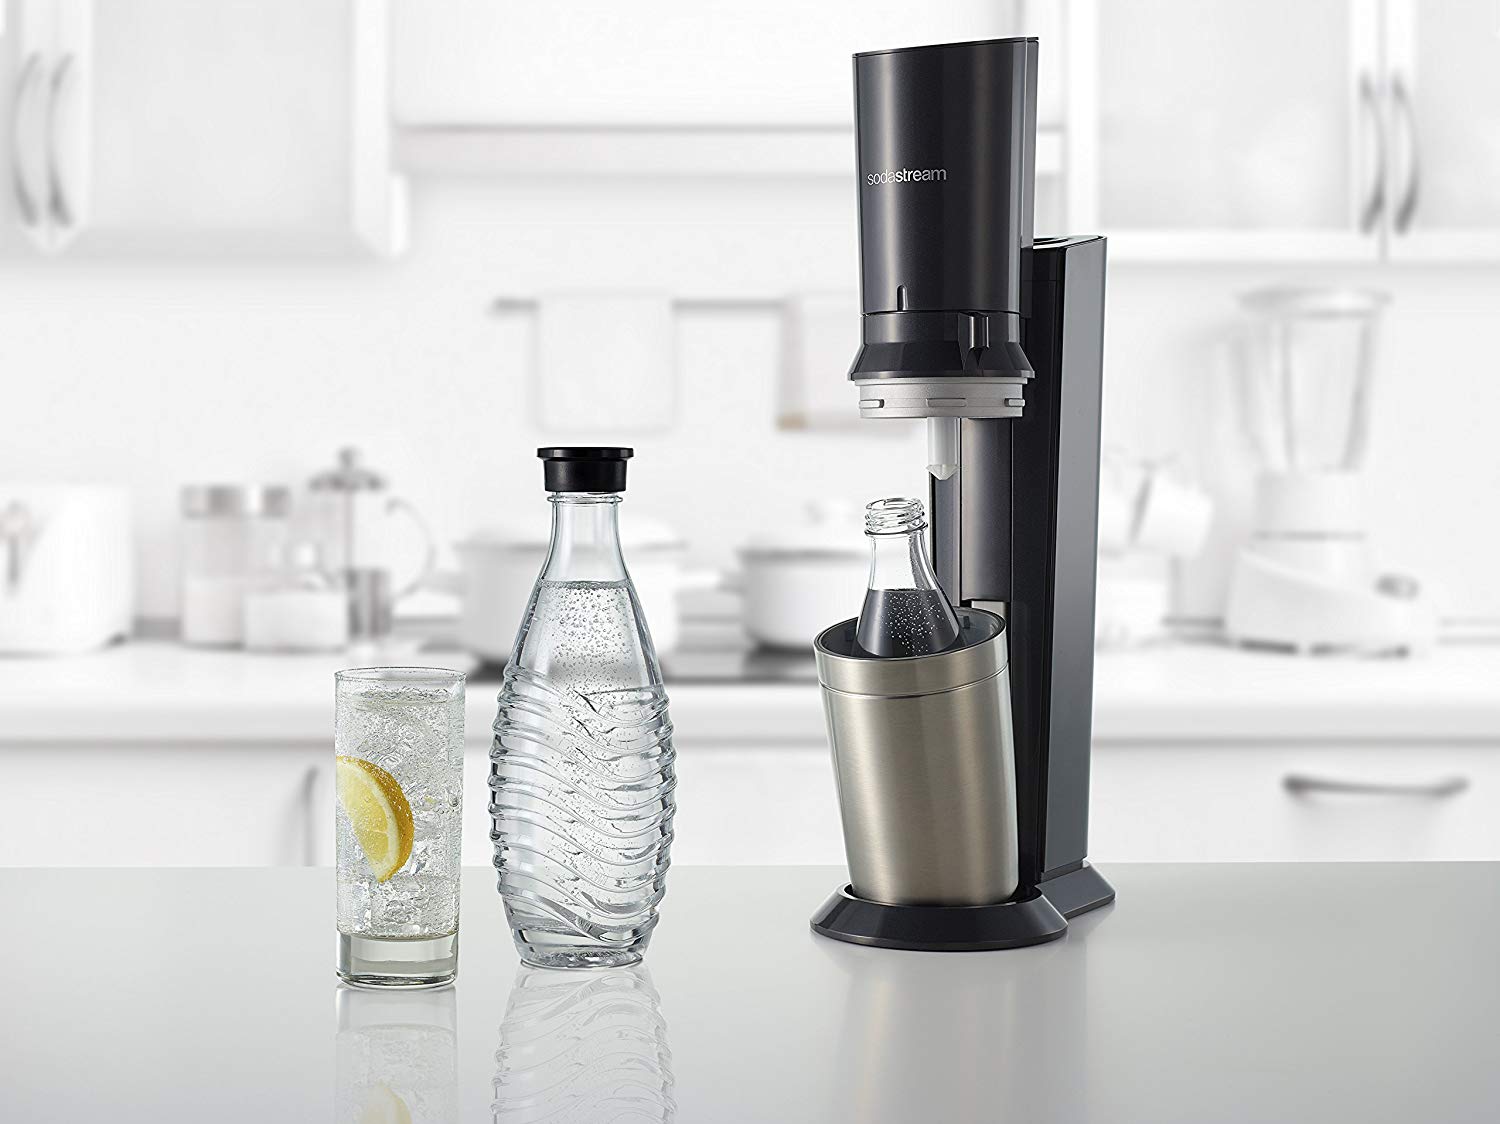 Comment fonctionne Sodastream ?